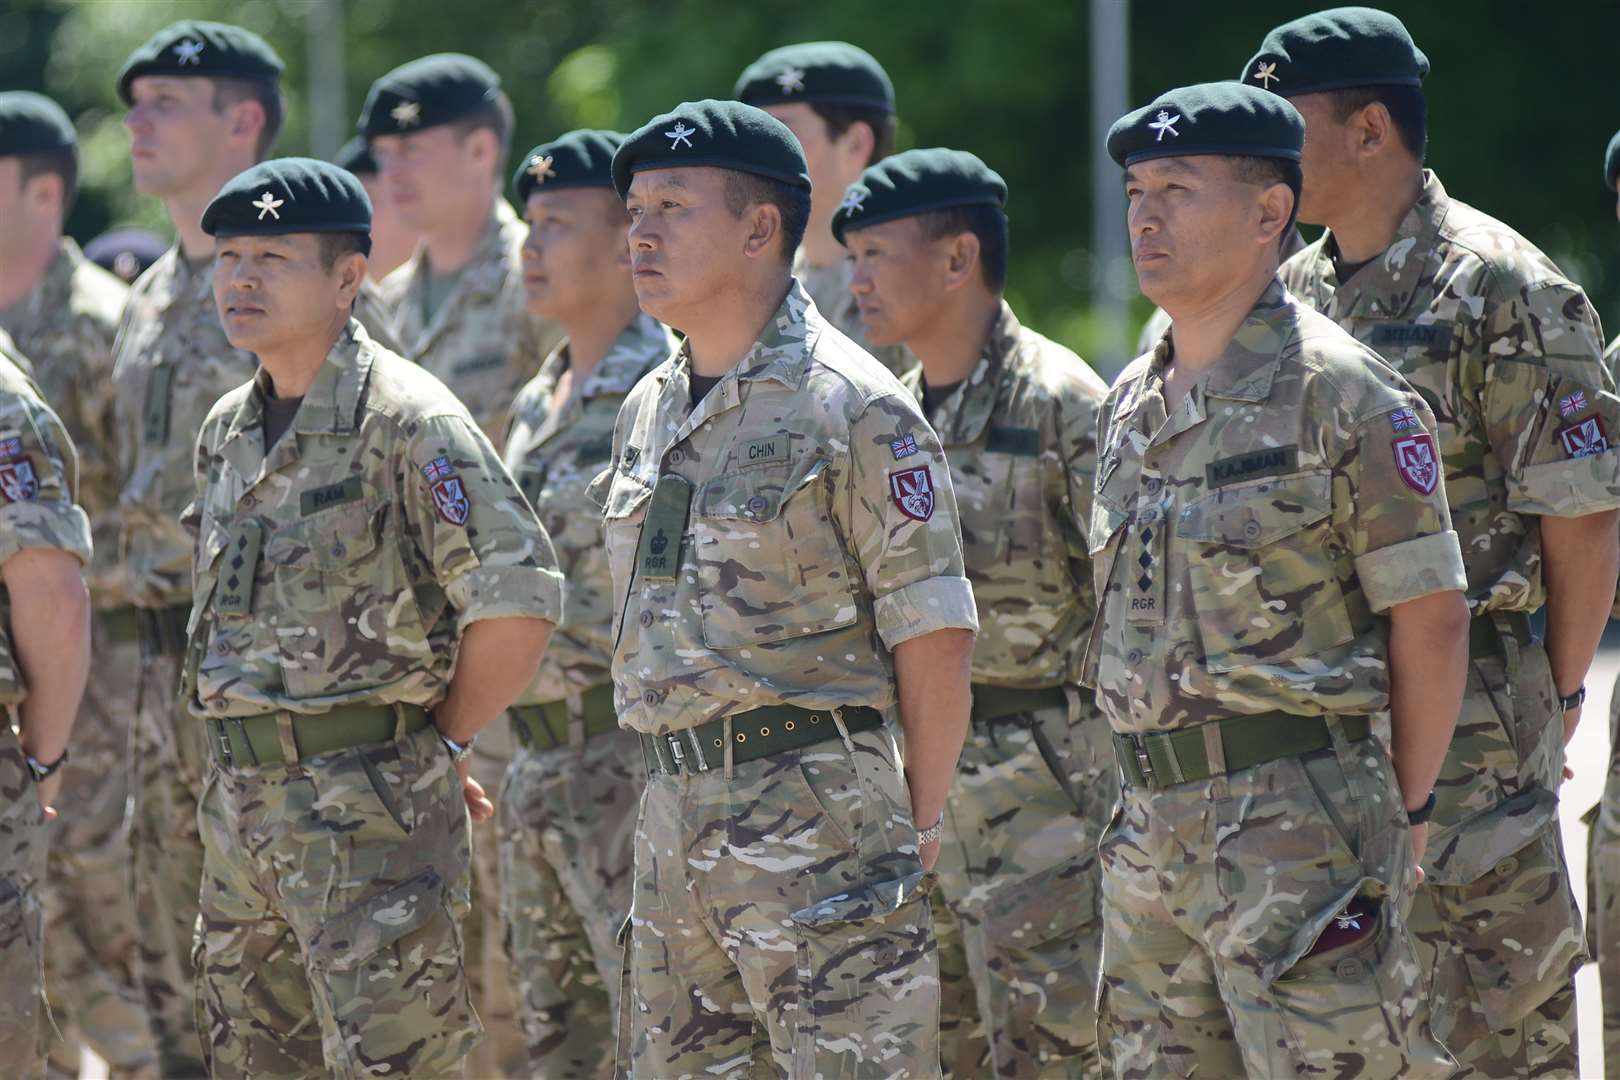 The troops swapped their green berets for maroon ones signifying they are now recognised as airborne troops